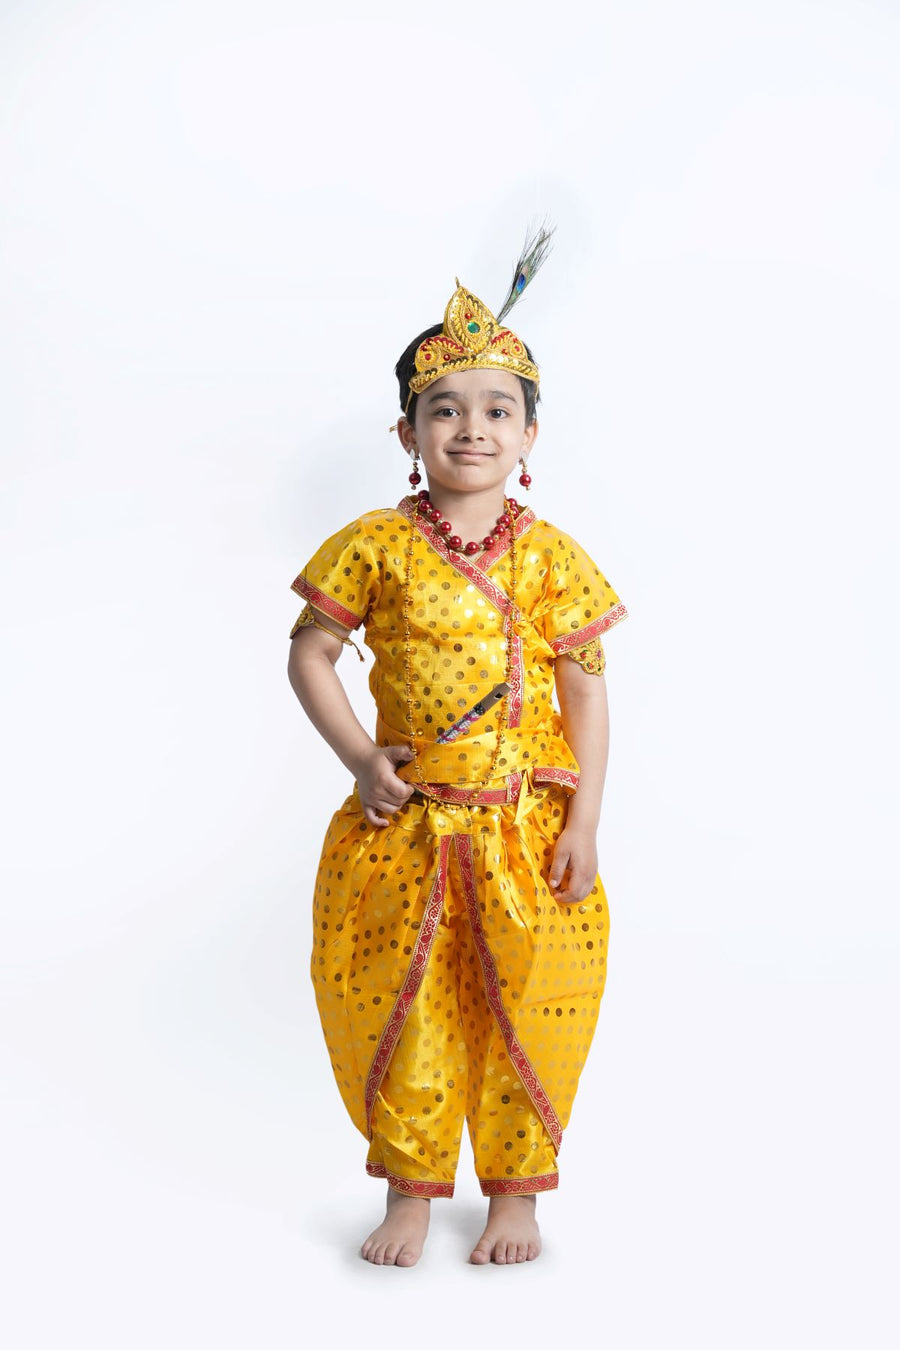 Pin by Uday Sarthi on My Saves | Fancy dress competition, Cute kids  photography, Fancy dress for kids